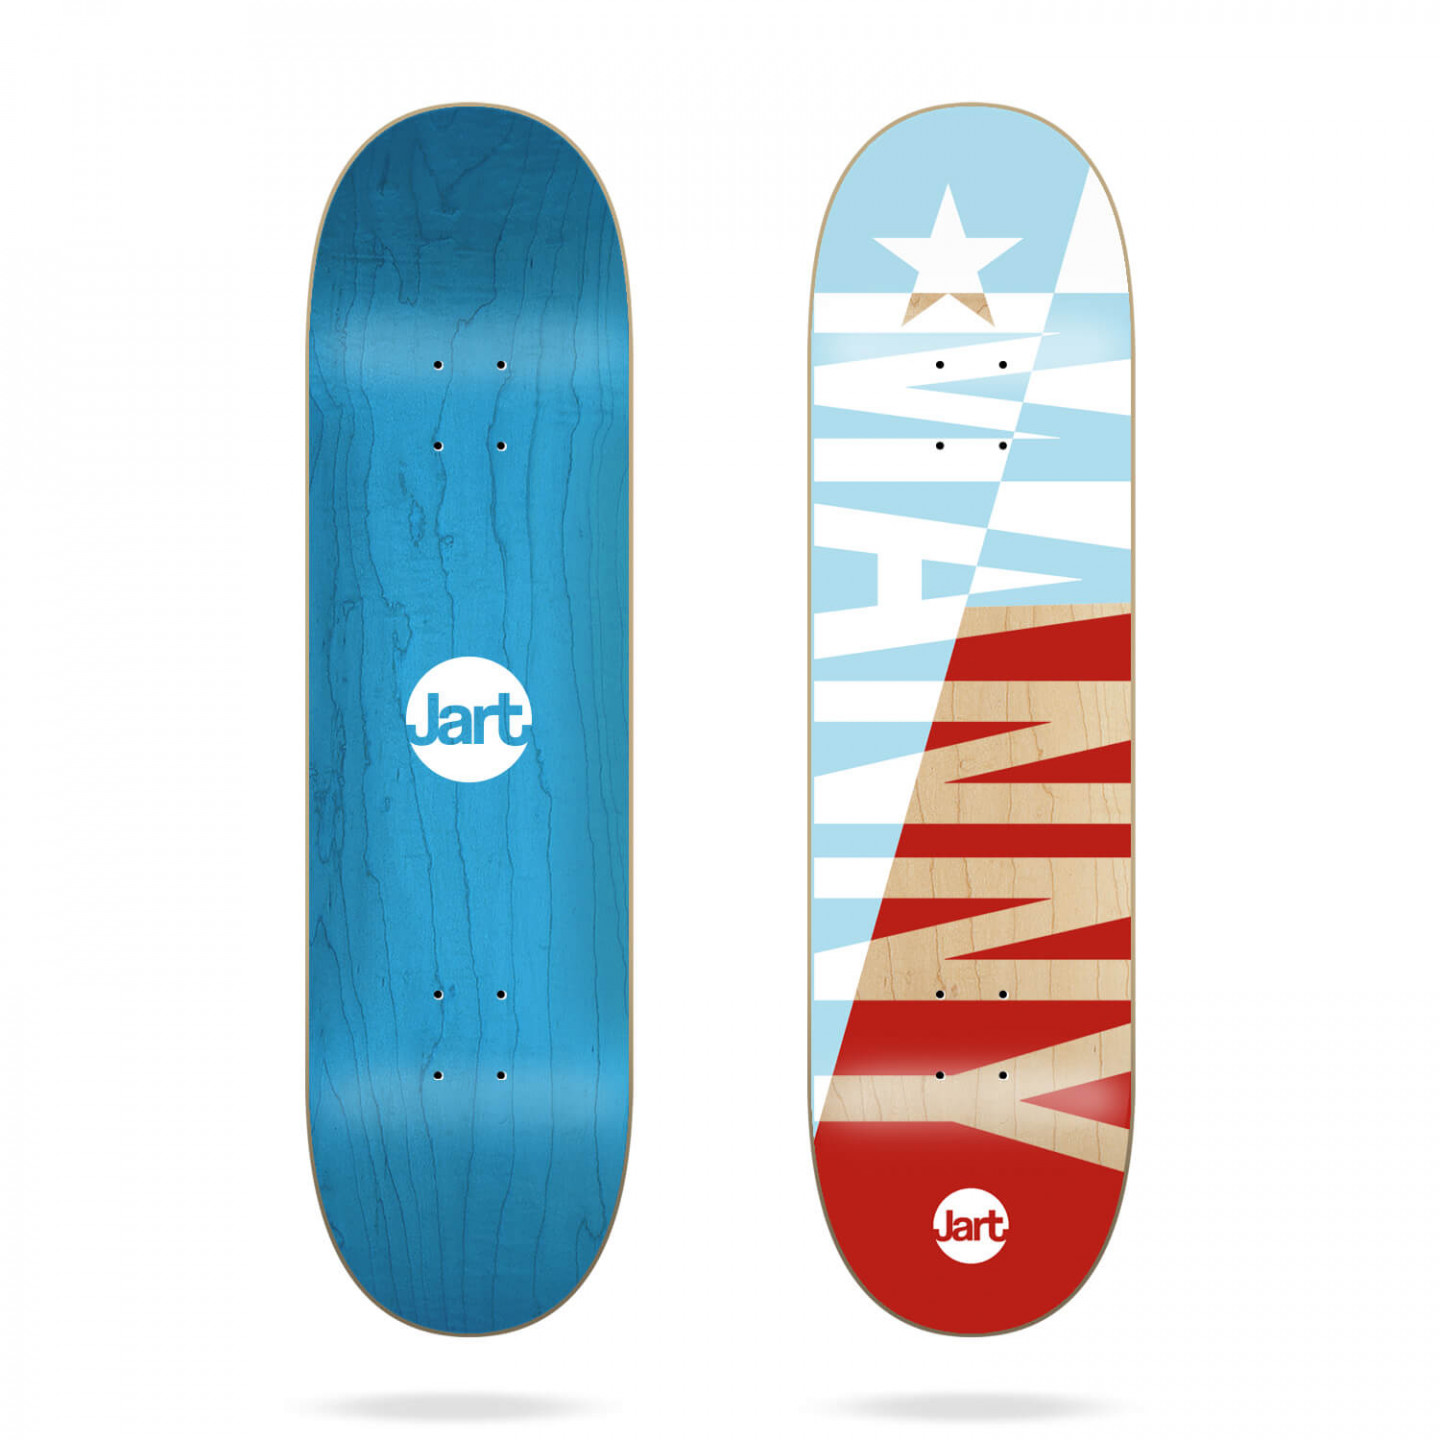 Jart Weed Therapy Skateboard Deck 8.25" 